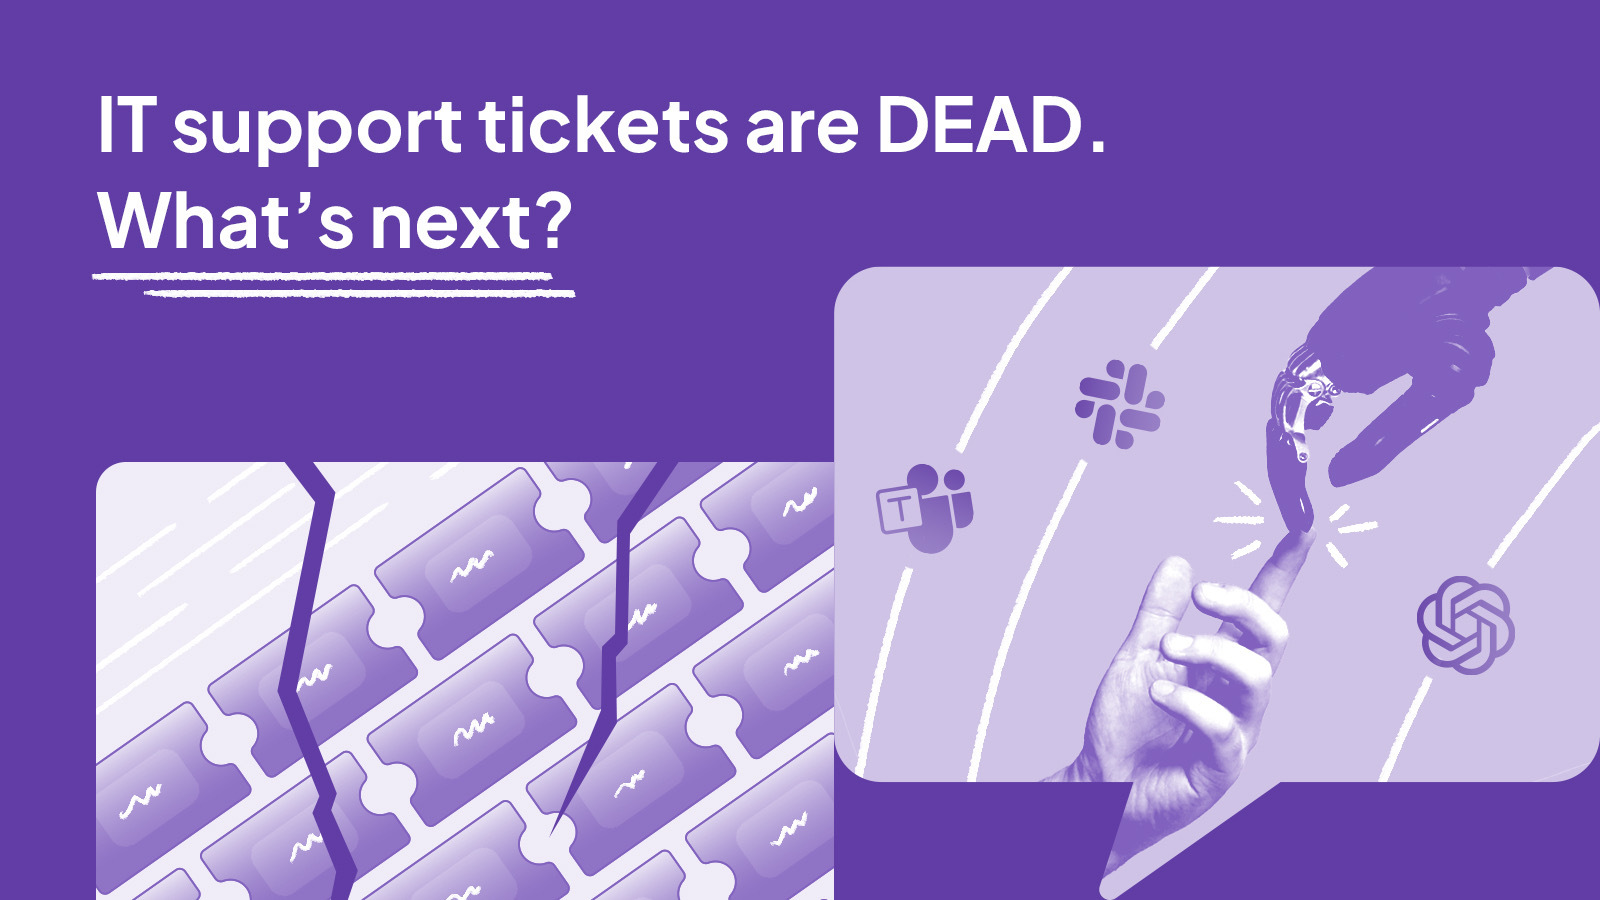 IT support tickets are dead. What’s next?